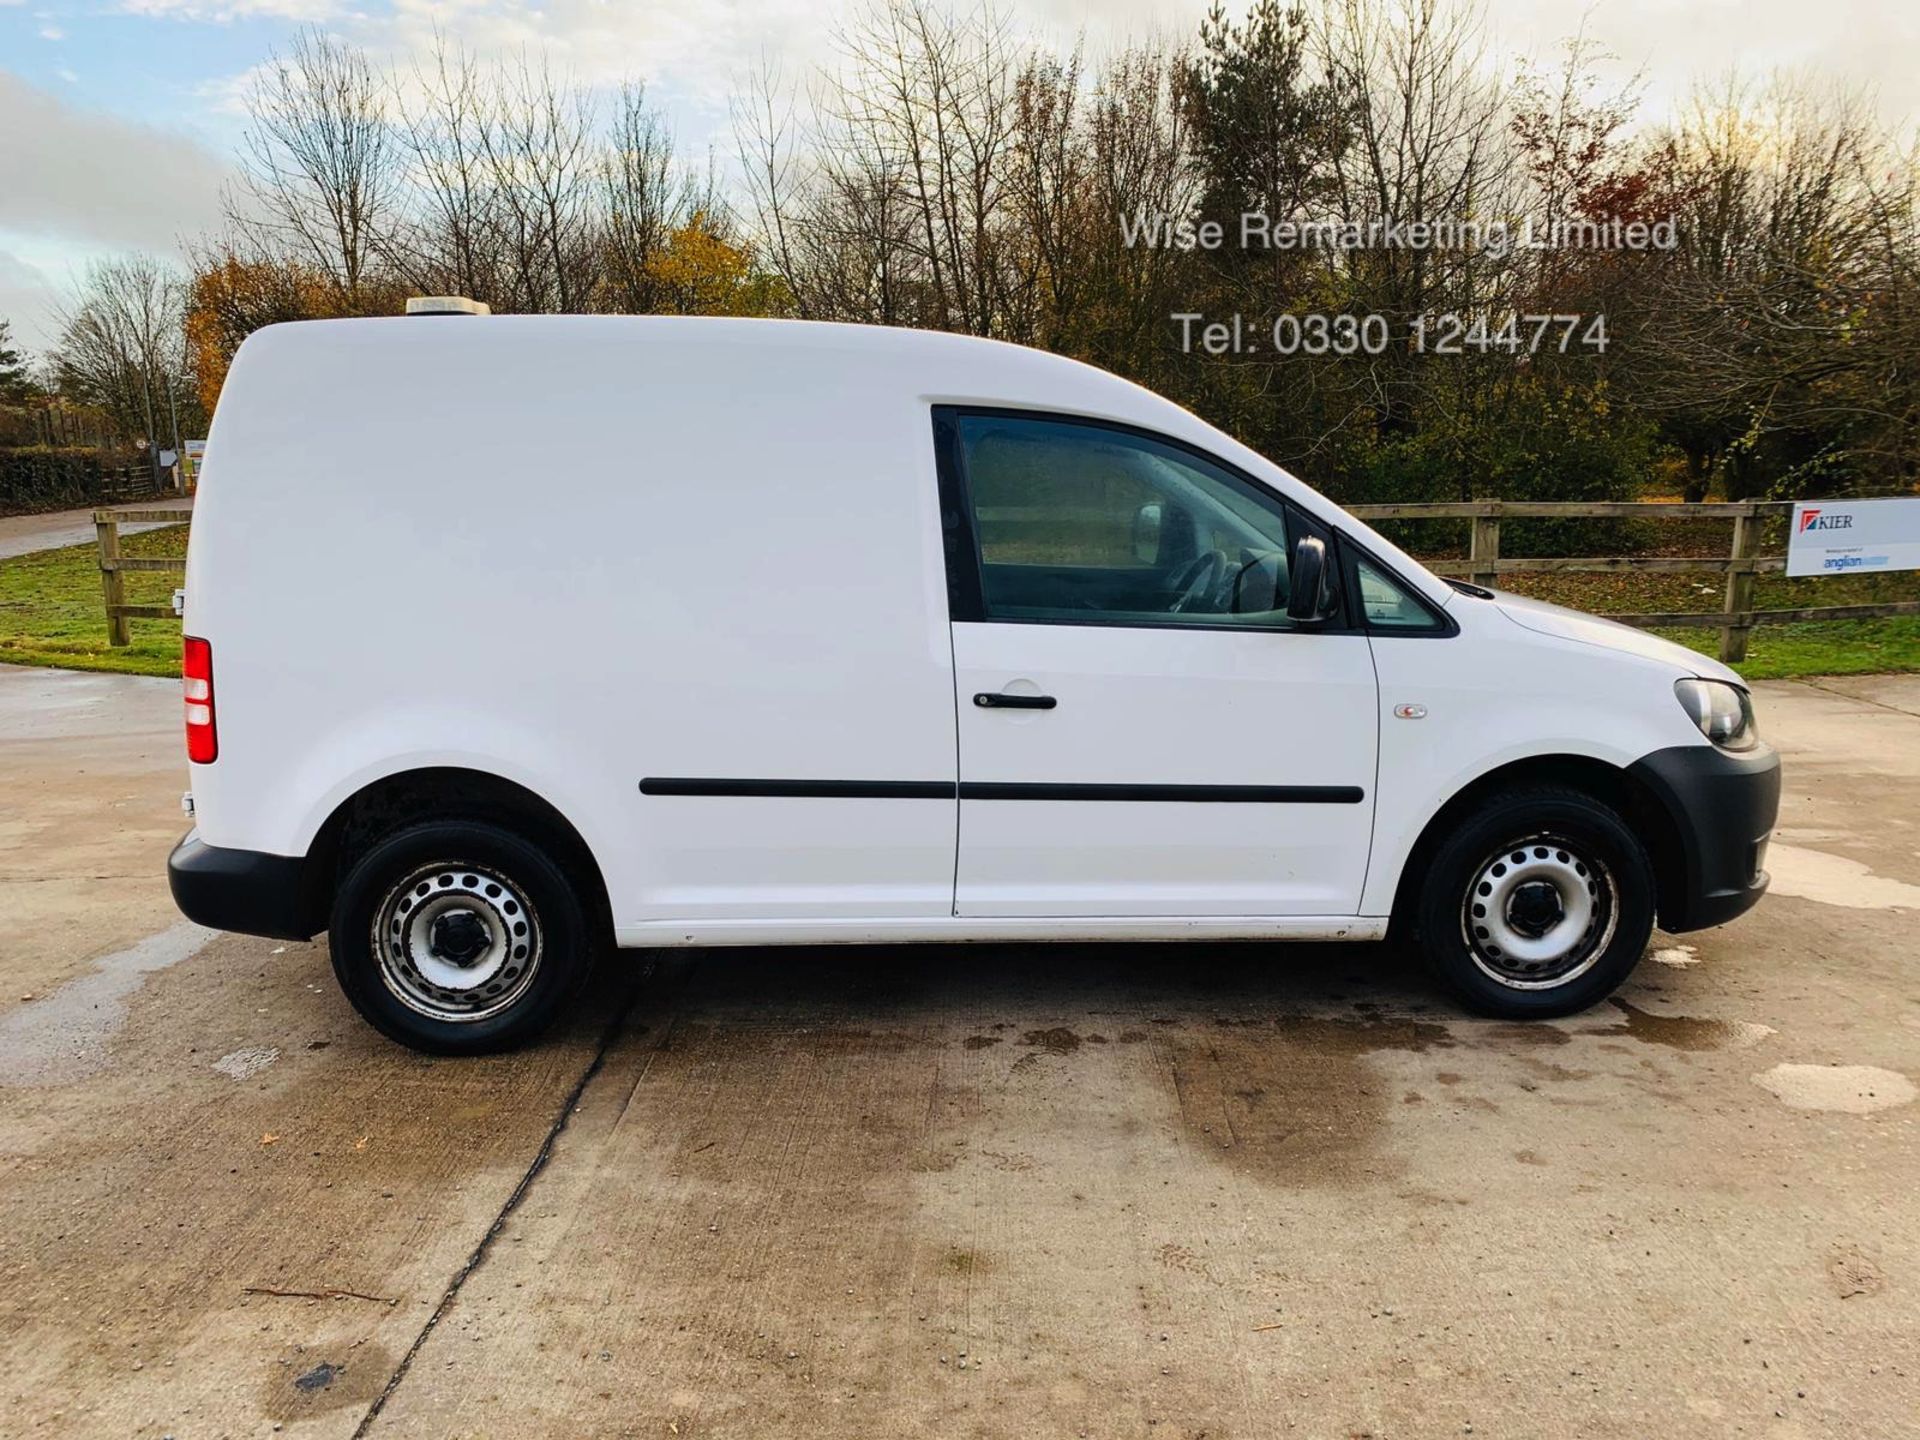 Volkswagen Caddy C20 1.6 TDI - 2012 Model - 1 Keeper From New - Side Loading Door - Ply Lined - Image 3 of 16